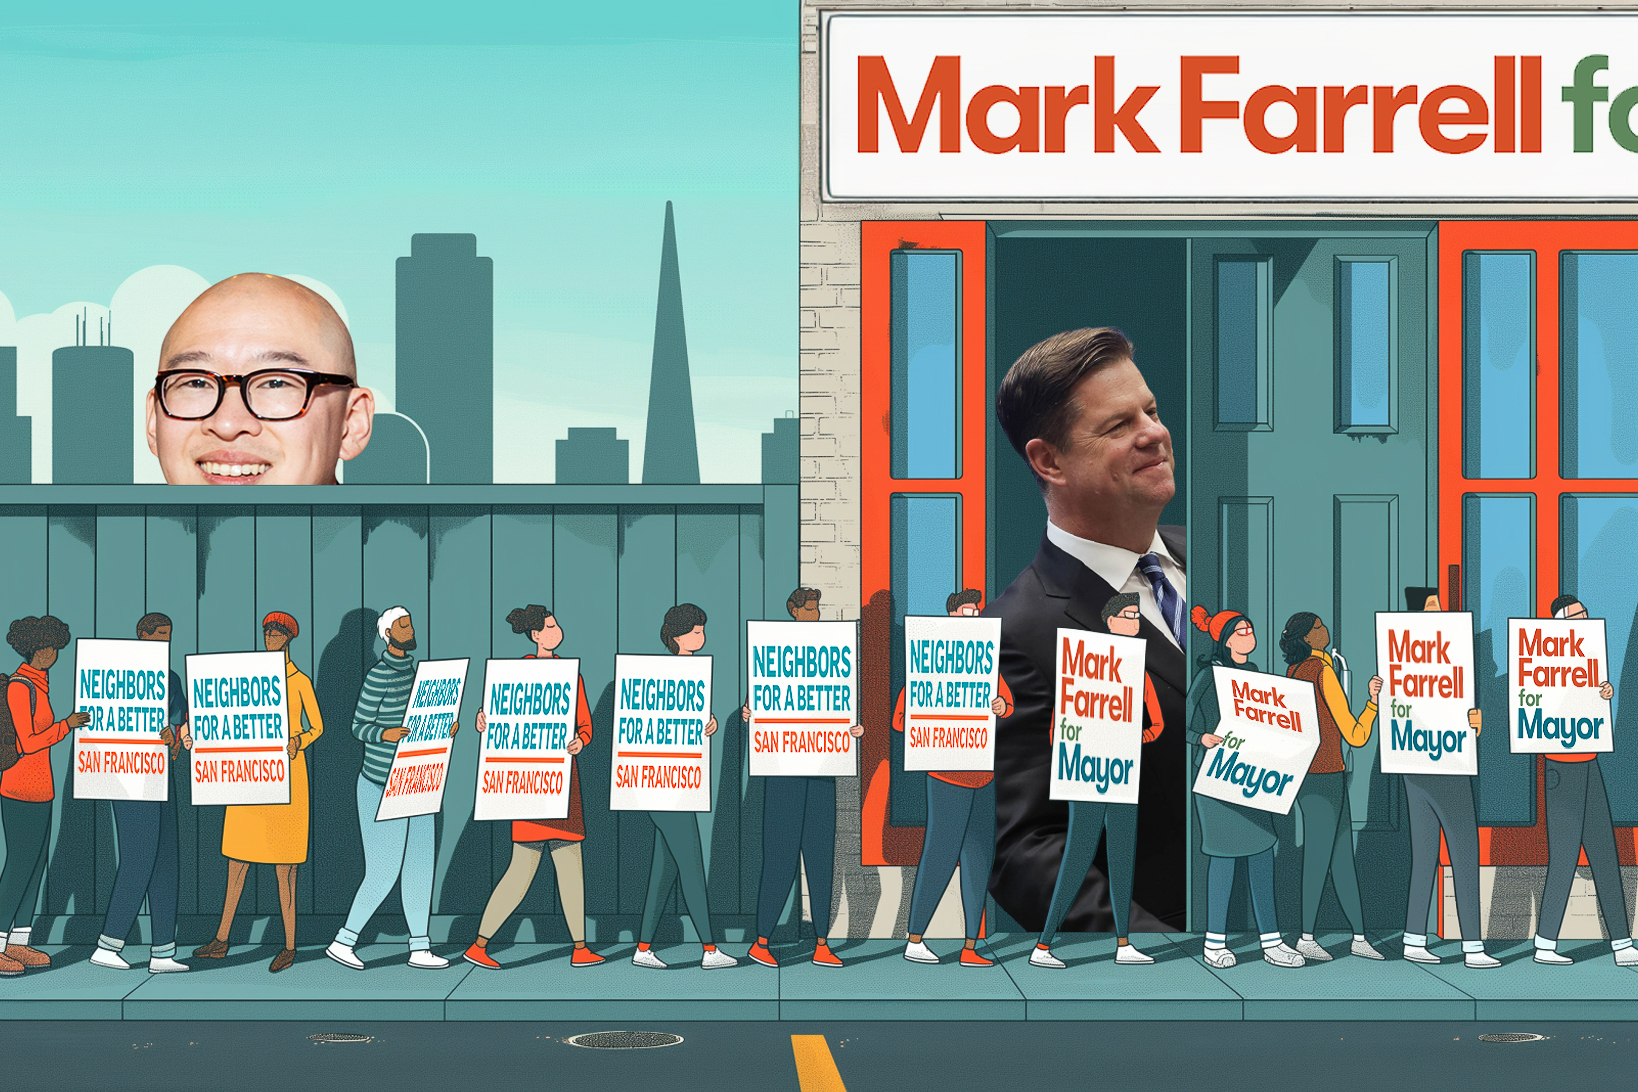 Jay Cheng, the head of Neighbors for a Better San Francisco, spent time working to help Mark Farrell's mayoral campaign hire staff, raising concerns about improper coordination.